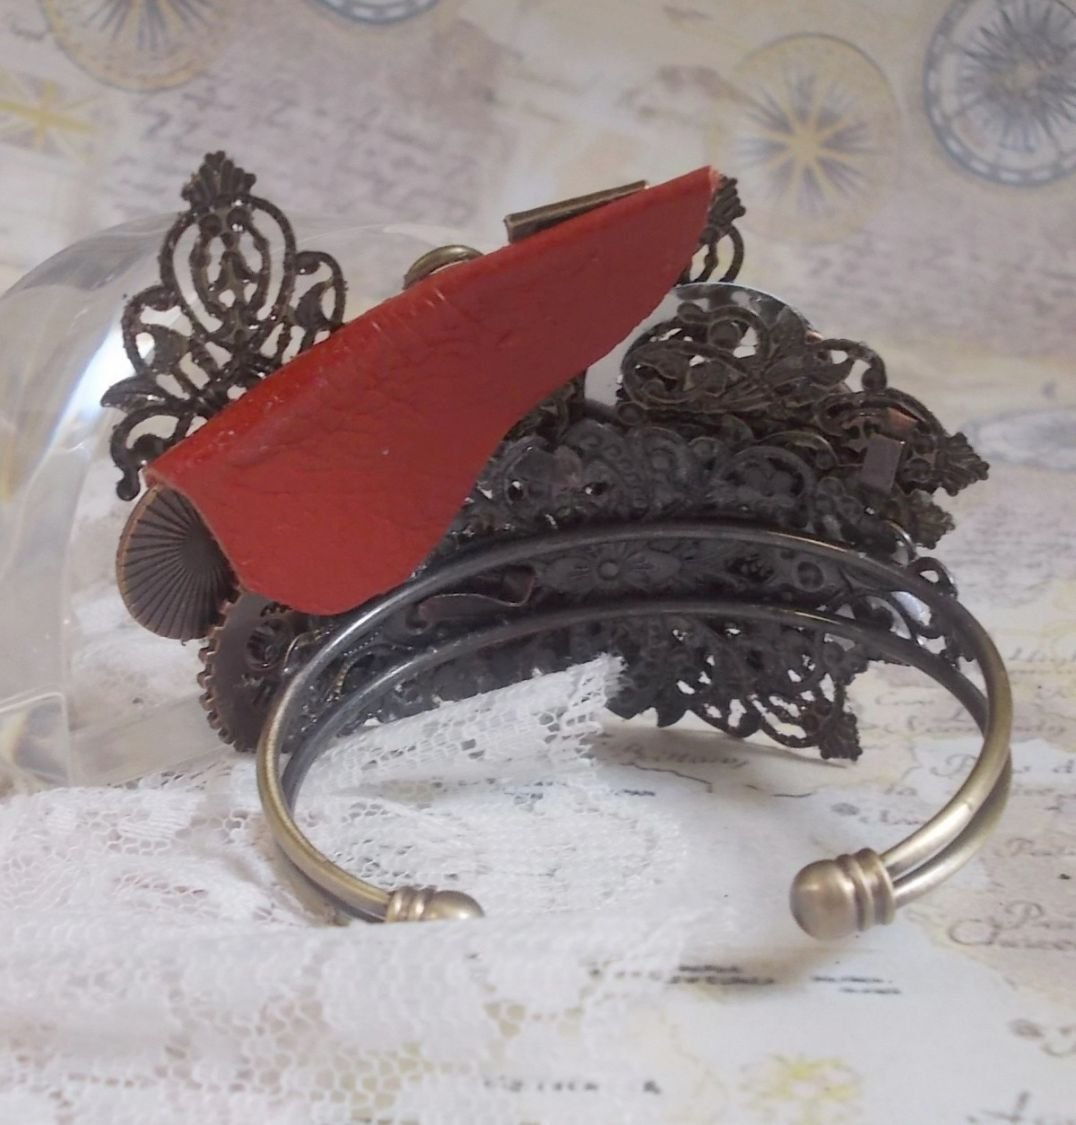 Navigating Shadow bracelet created with Cognac leather, fabric flower, accessories in Bronze, Copper, Black with charms